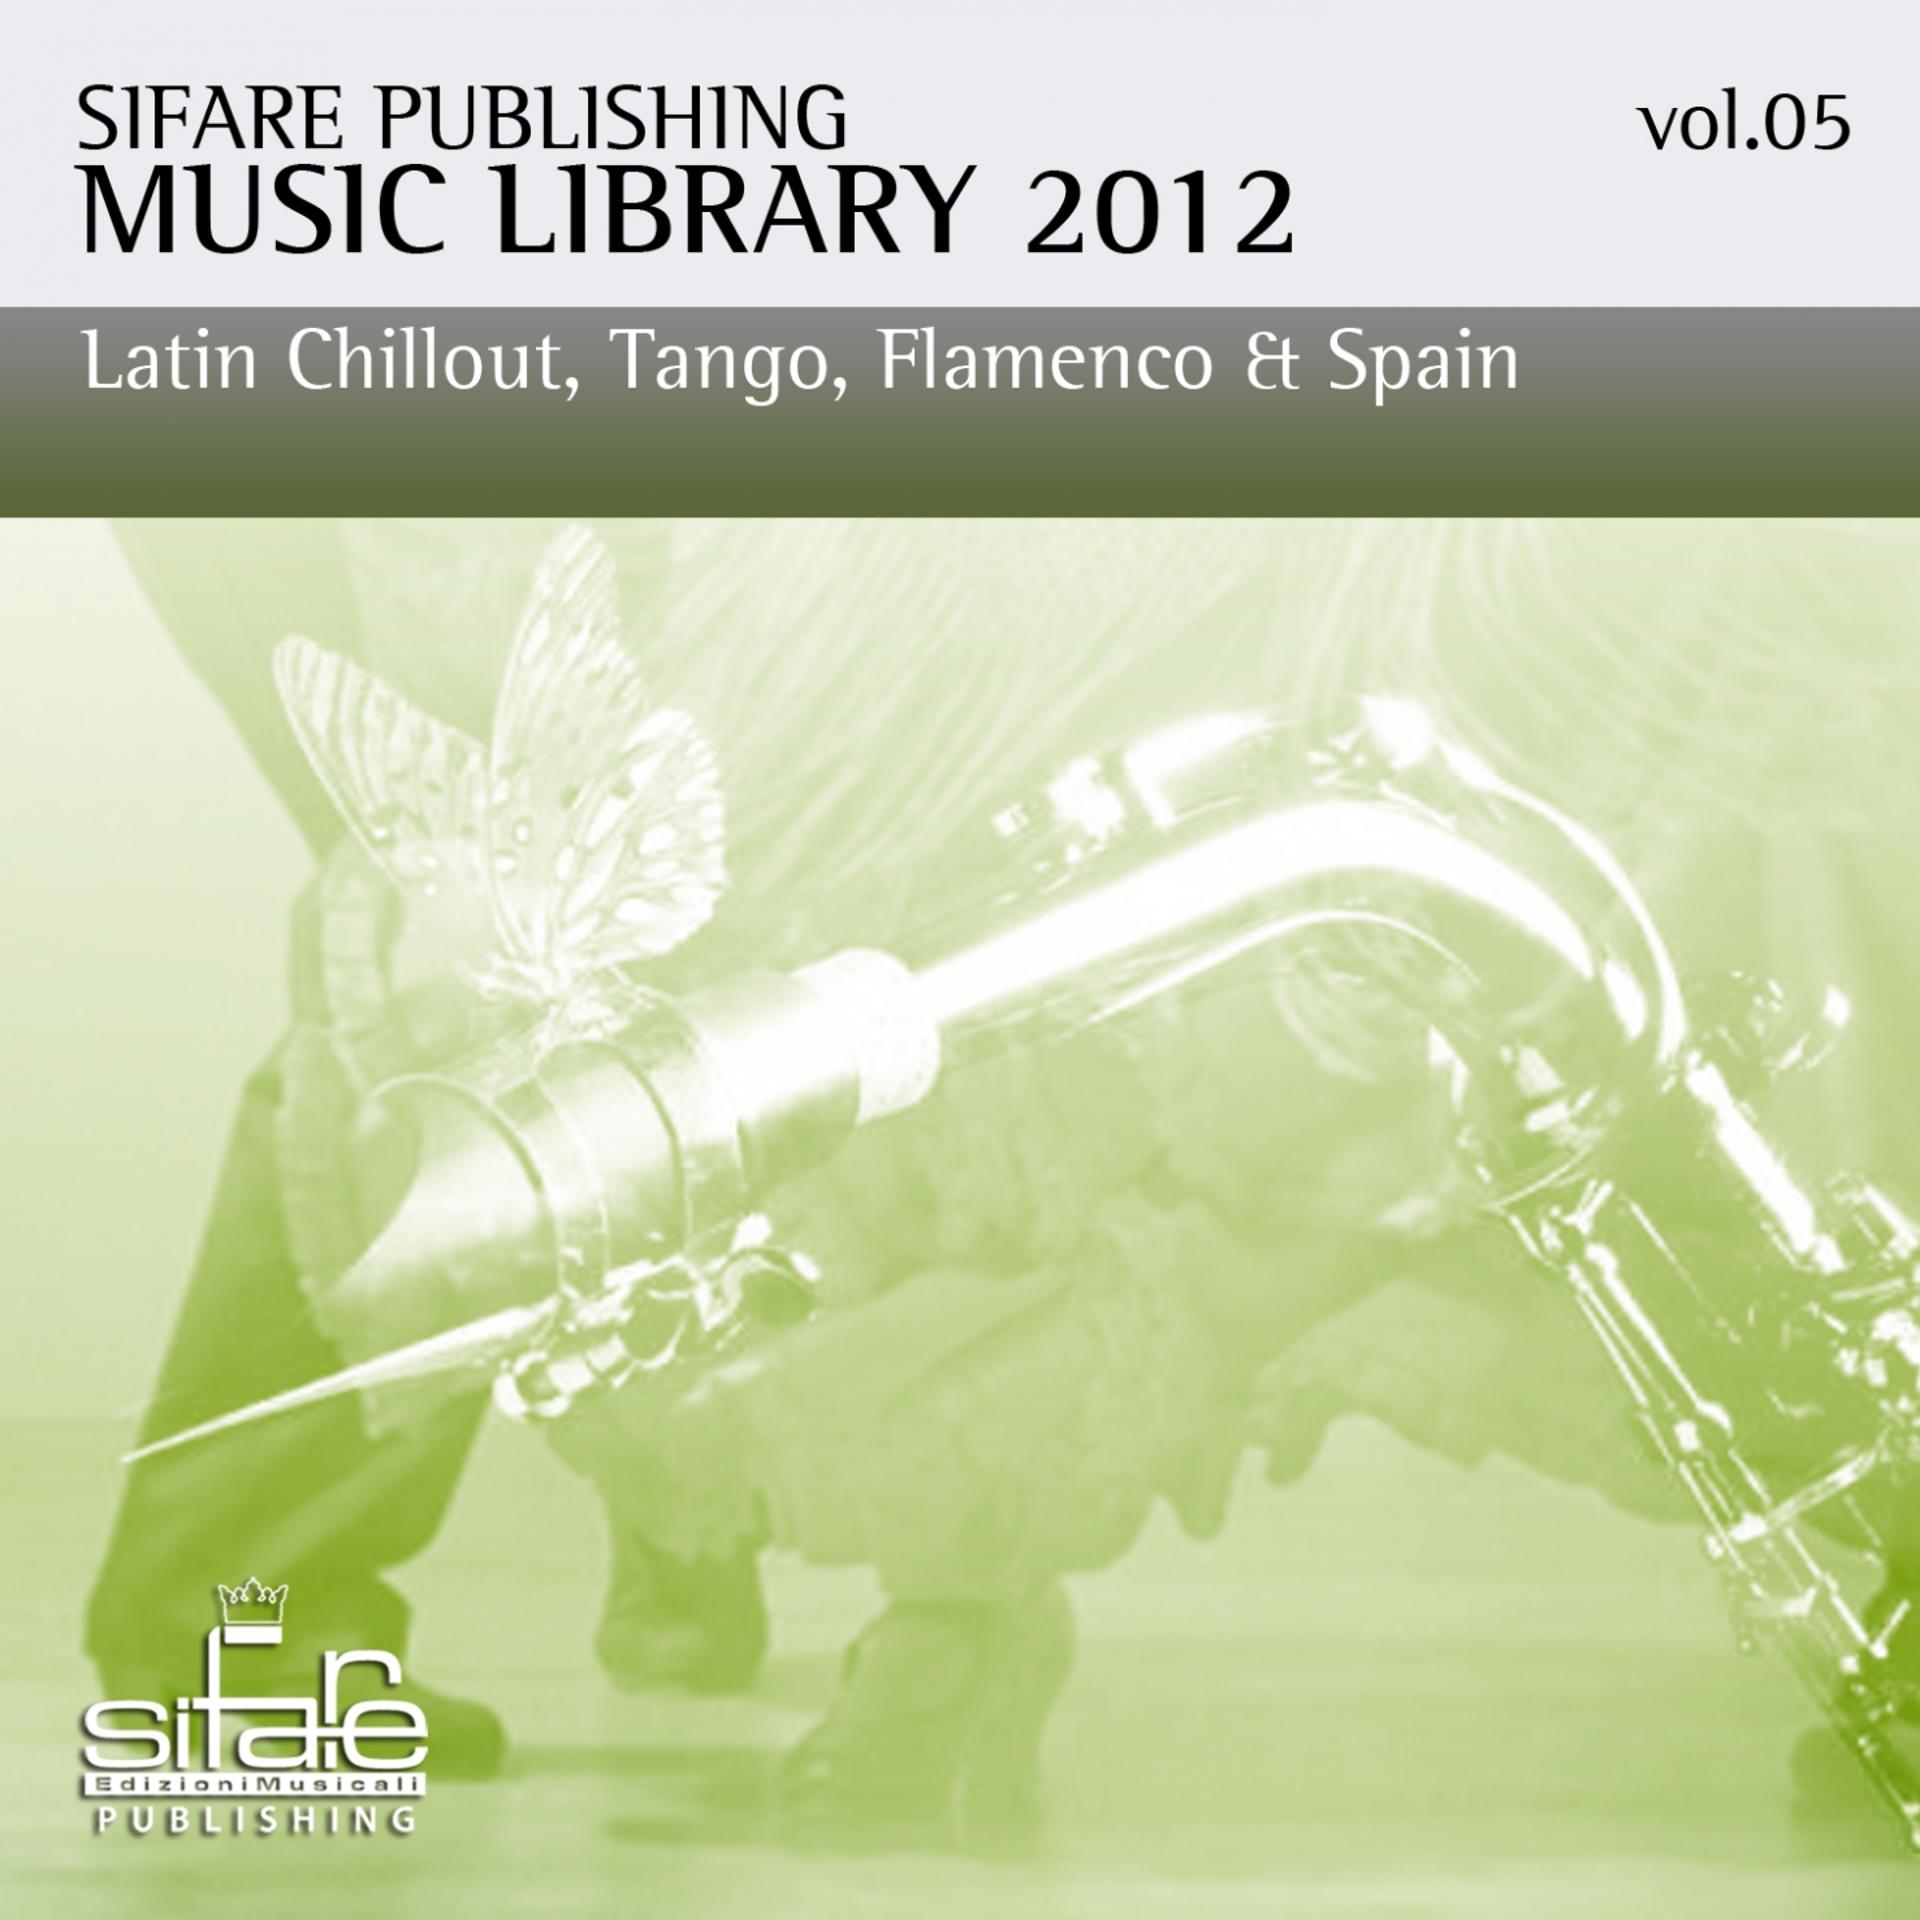 Постер альбома Open Bar Music, Vol. 5 (Sifare Publishing Music Library 2012, / Happy Hour, Jazz Bar, Commercial Music / Latin Chillout, Tango, Flamenco, Spain)